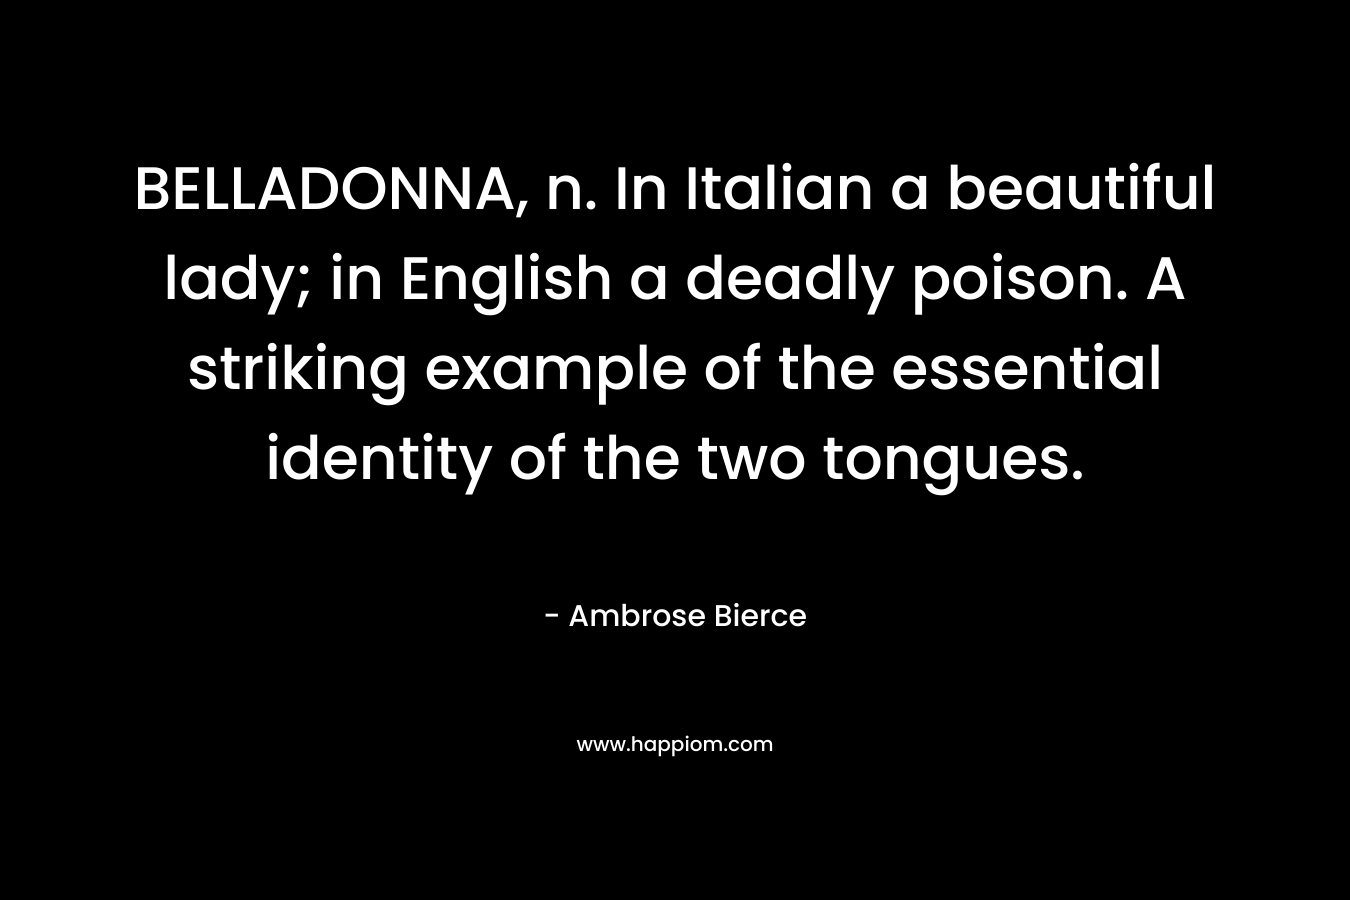 BELLADONNA, n. In Italian a beautiful lady; in English a deadly poison. A striking example of the essential identity of the two tongues. – Ambrose Bierce